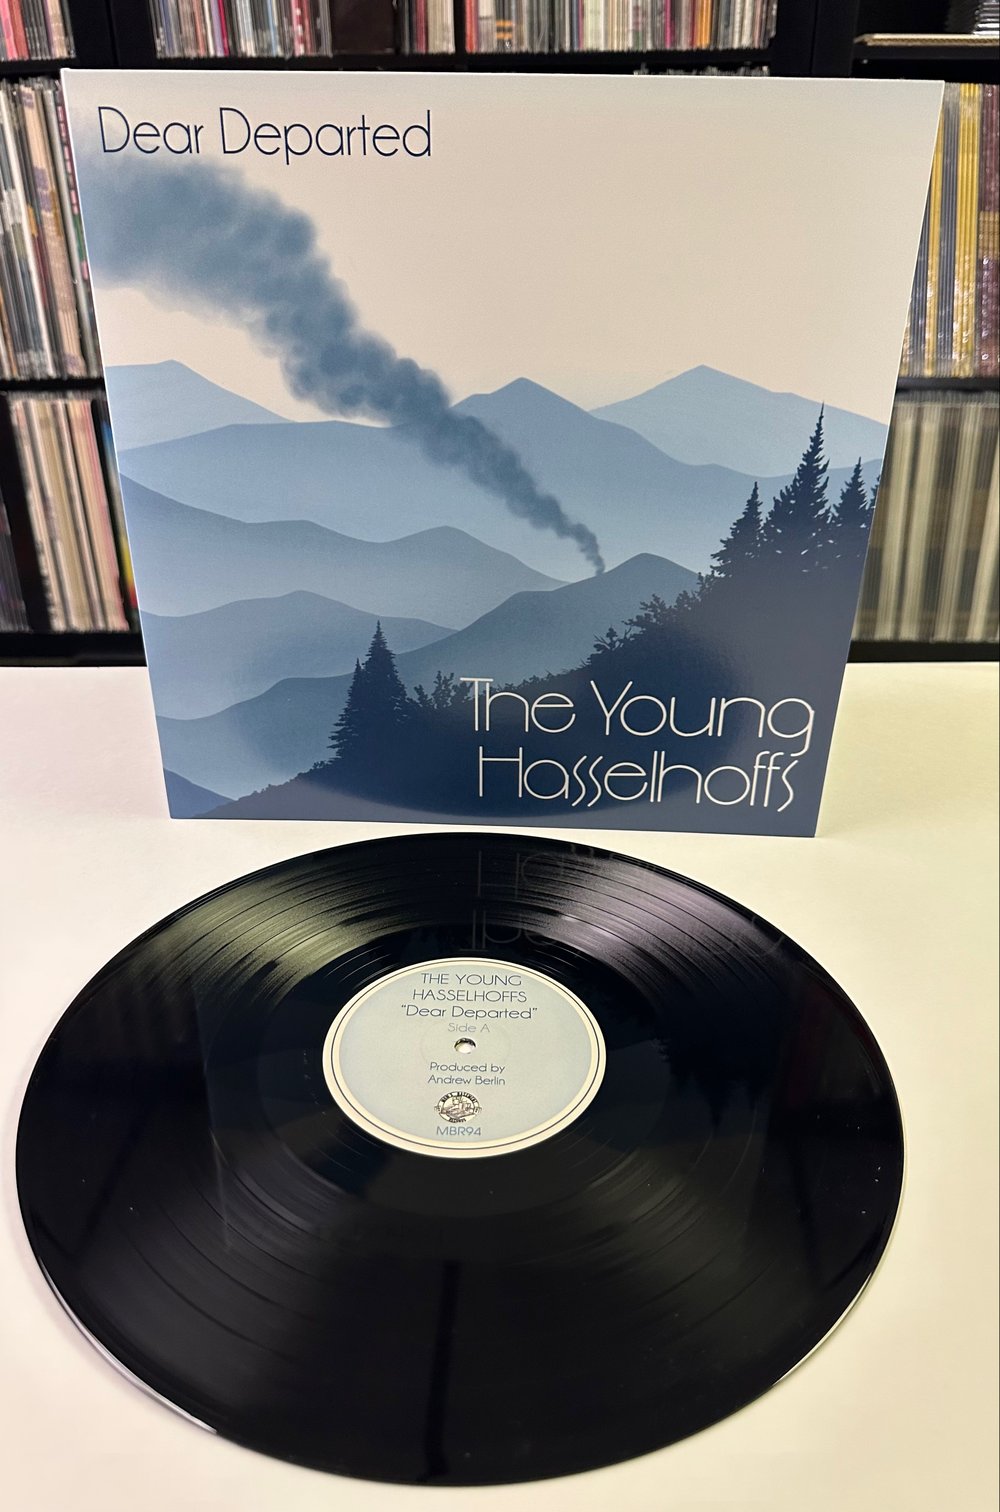 The Young Hasselhoffs - Dear Departed Lp or Cd (Second Pressing)